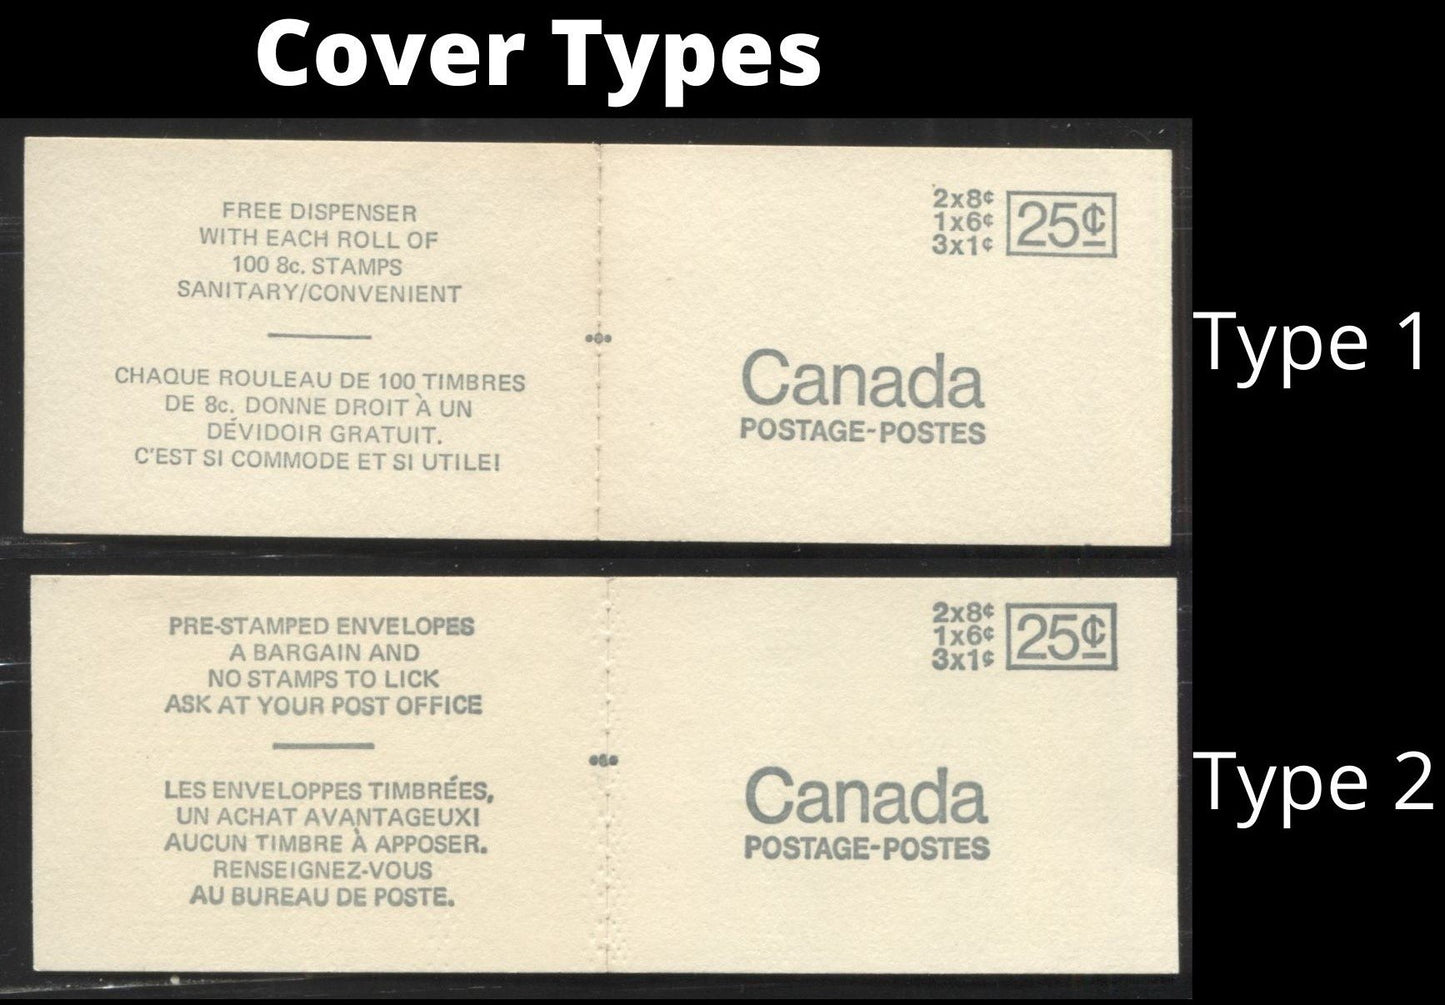 Lot #59 Canada McCann #BK69f,j 1c Purple Brown, 6c Black, And 8c Slate, 1967-1973 Centennial Issue, A Specialized Lot of Three 25c Booklets, Type 1 Free Dispenser Cover, Different MF-fl and HF-fl Papers, Settings A, B & C As Described in Harris